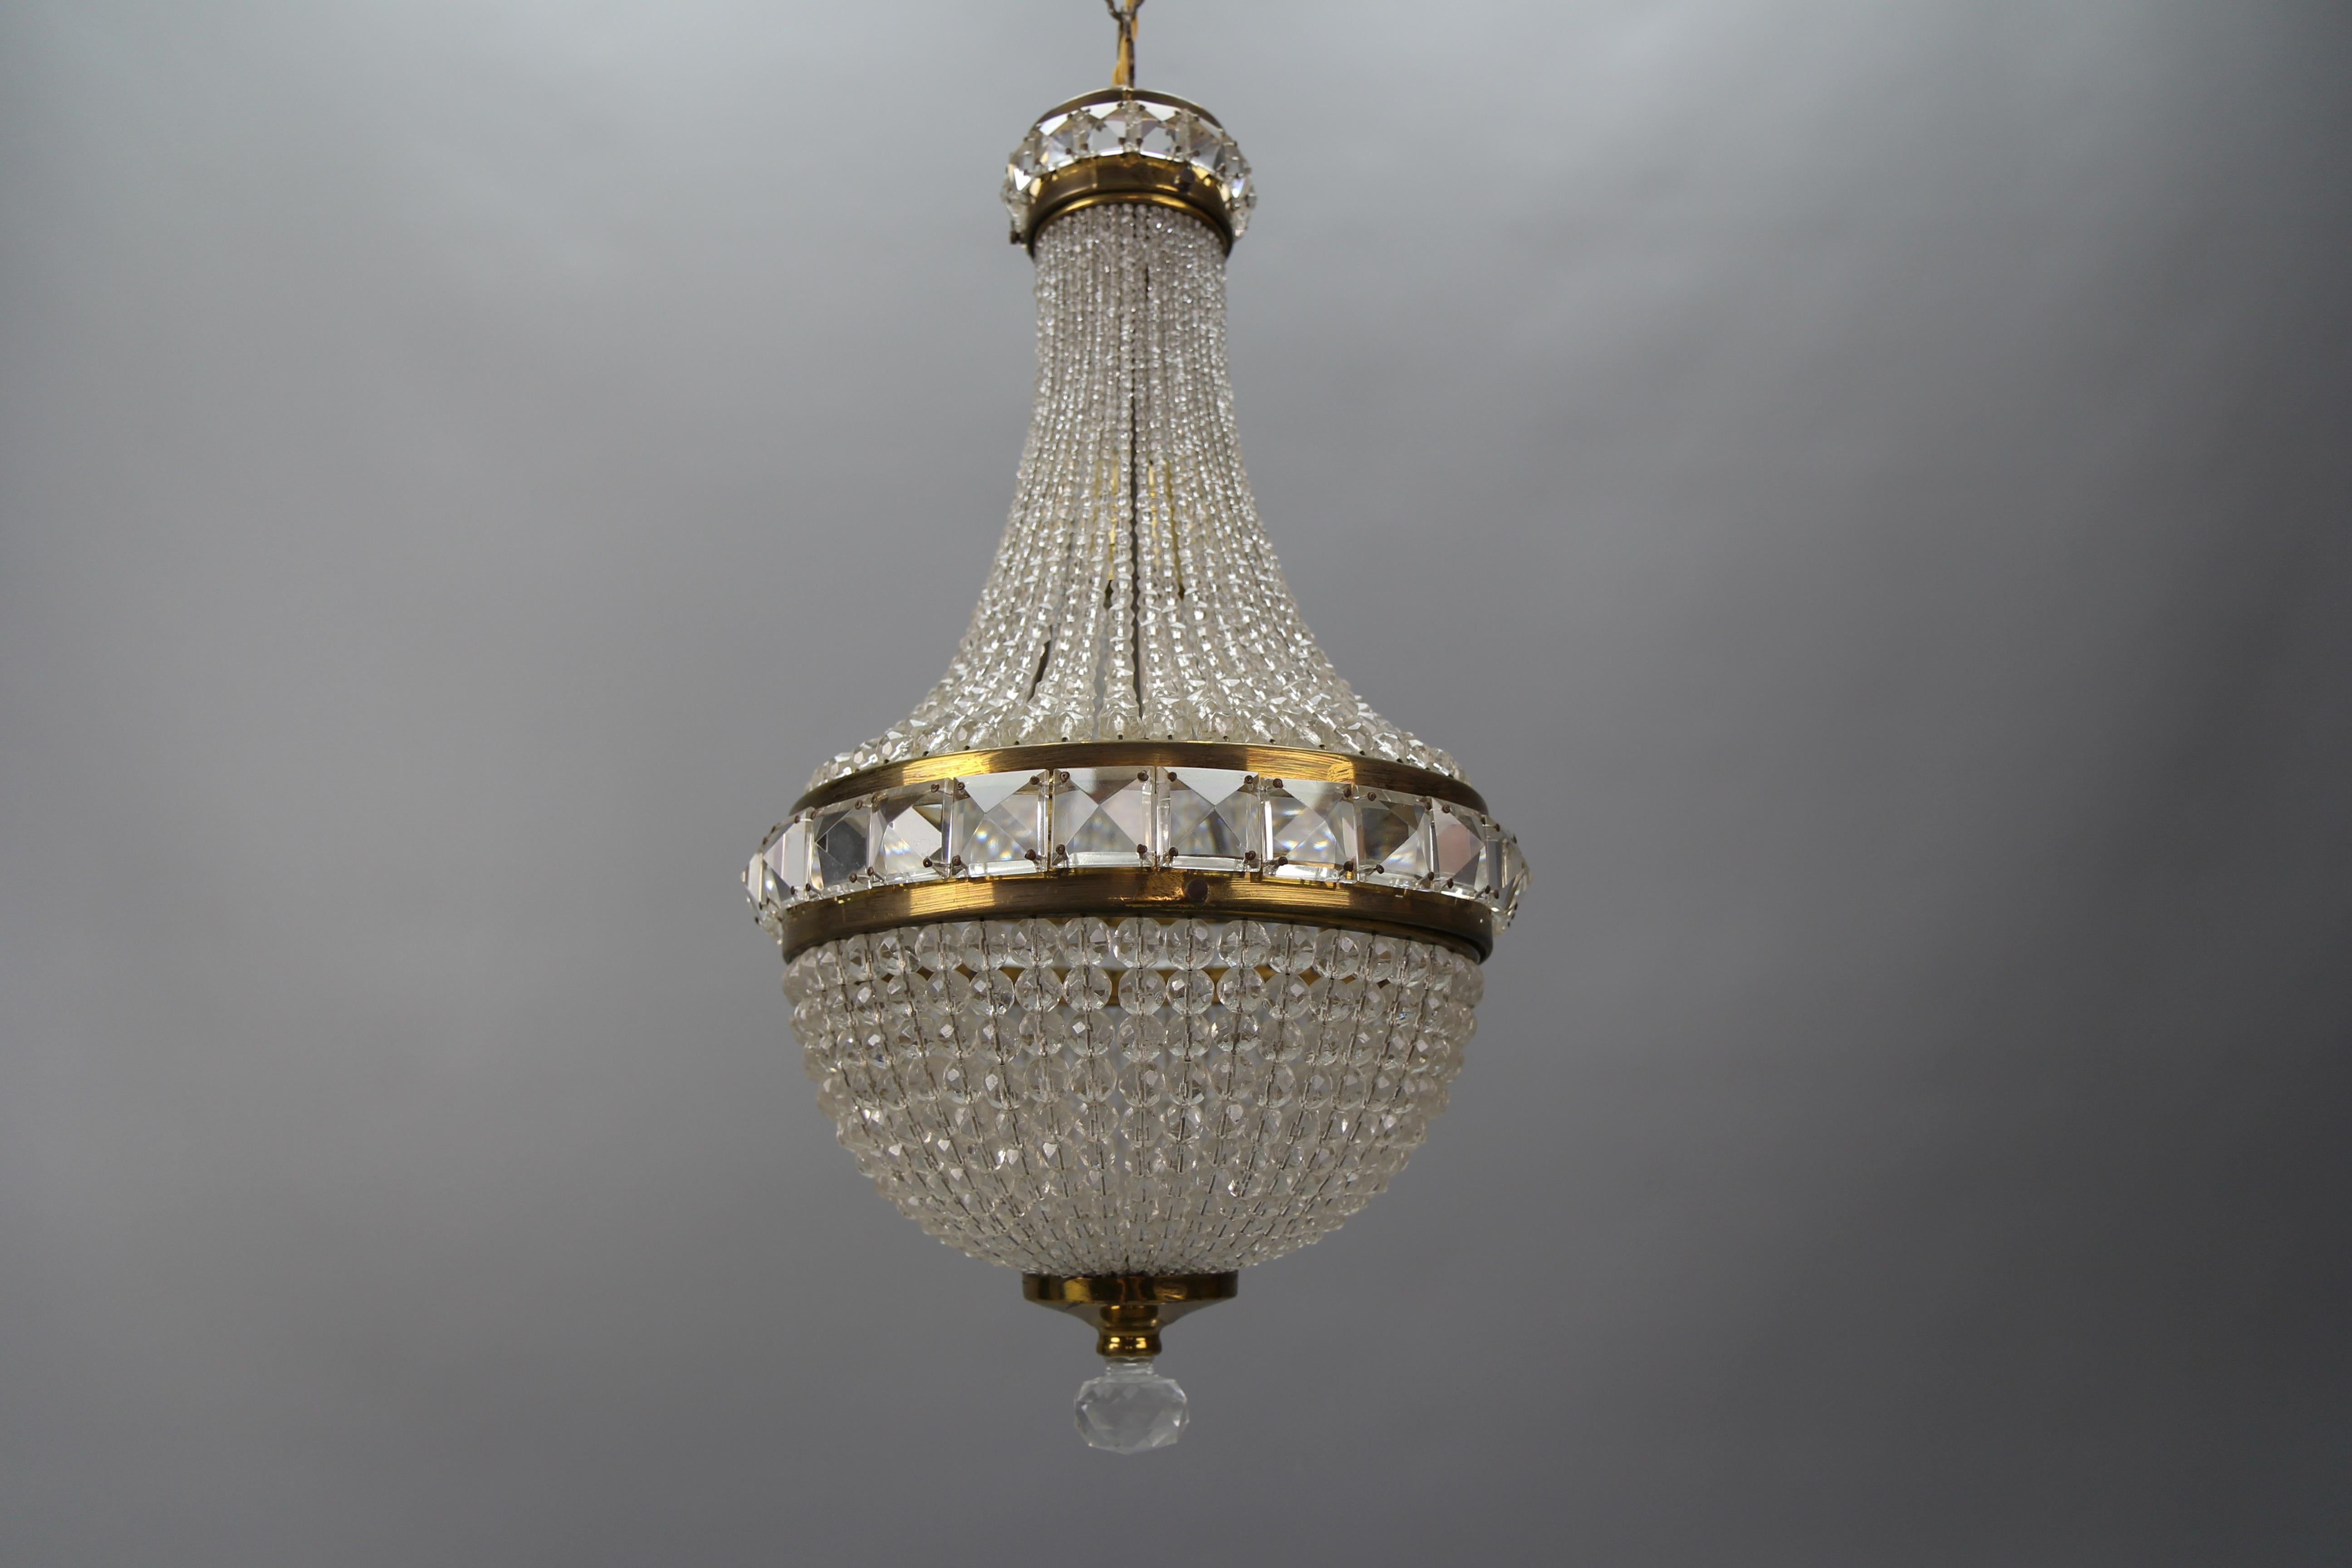 Mid-20th Century Czech Crystal Beaded Empire Style Dome Chandelier For Sale